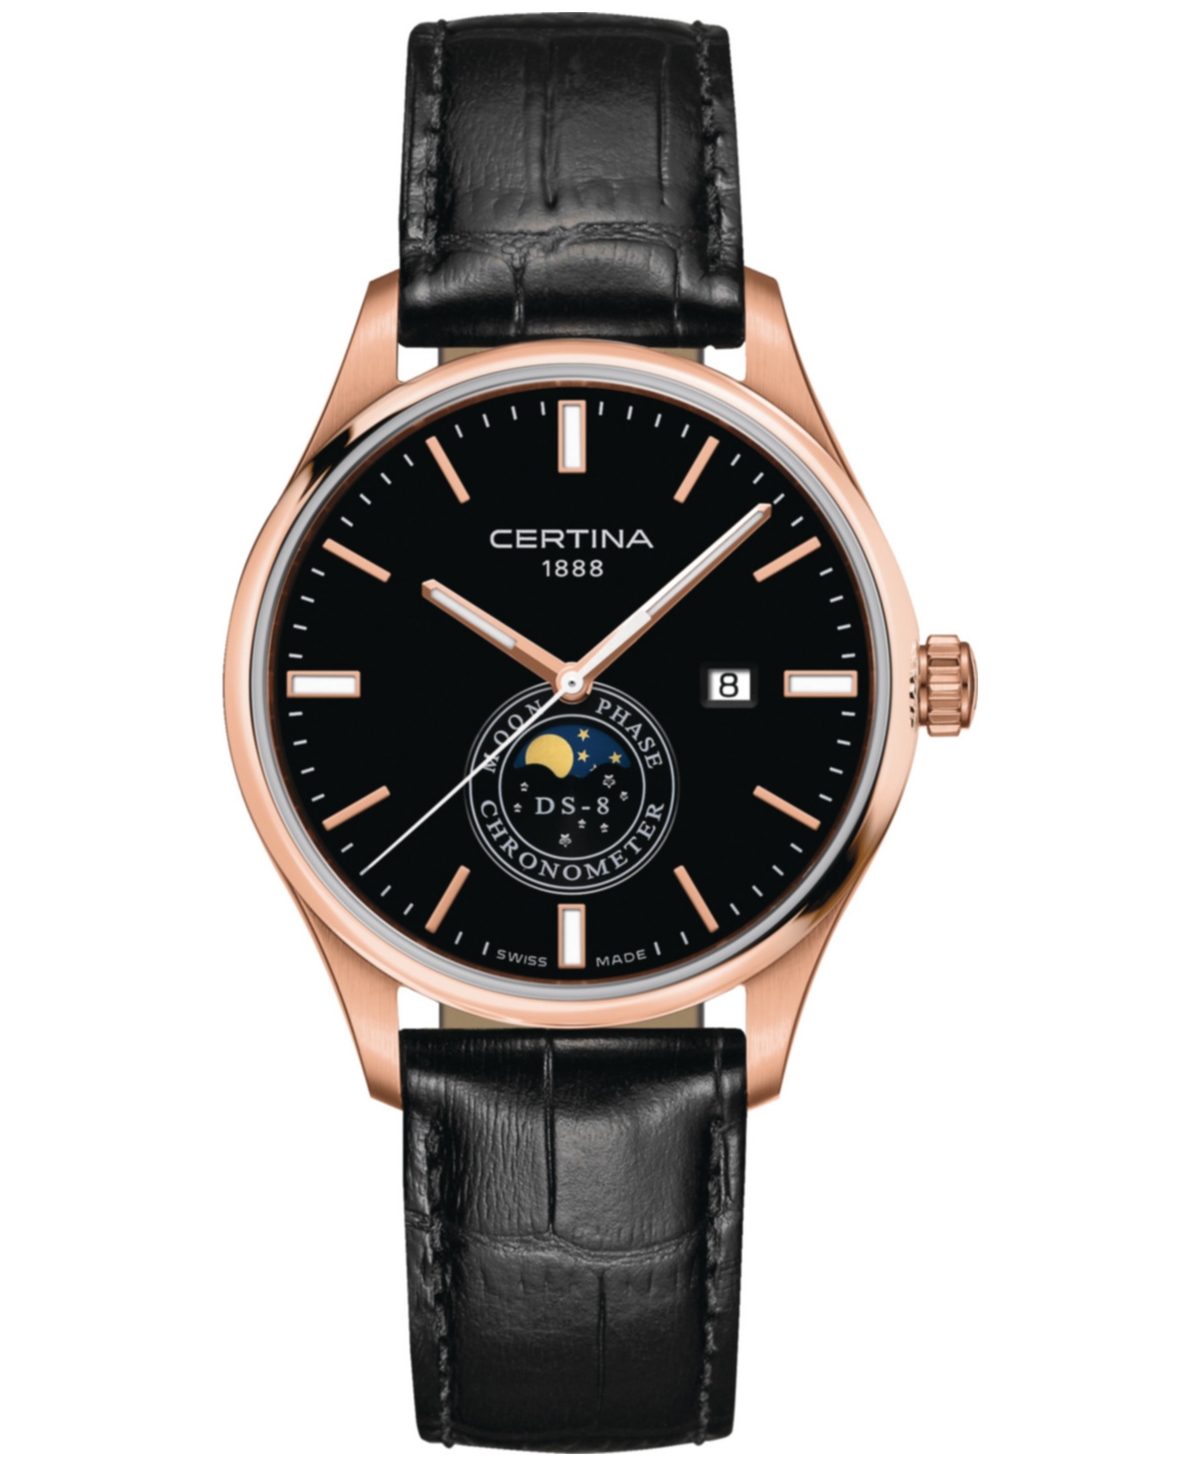 Certina Men's Swiss Ds-8 Moon Phase Black Leather Strap Watch 41mm